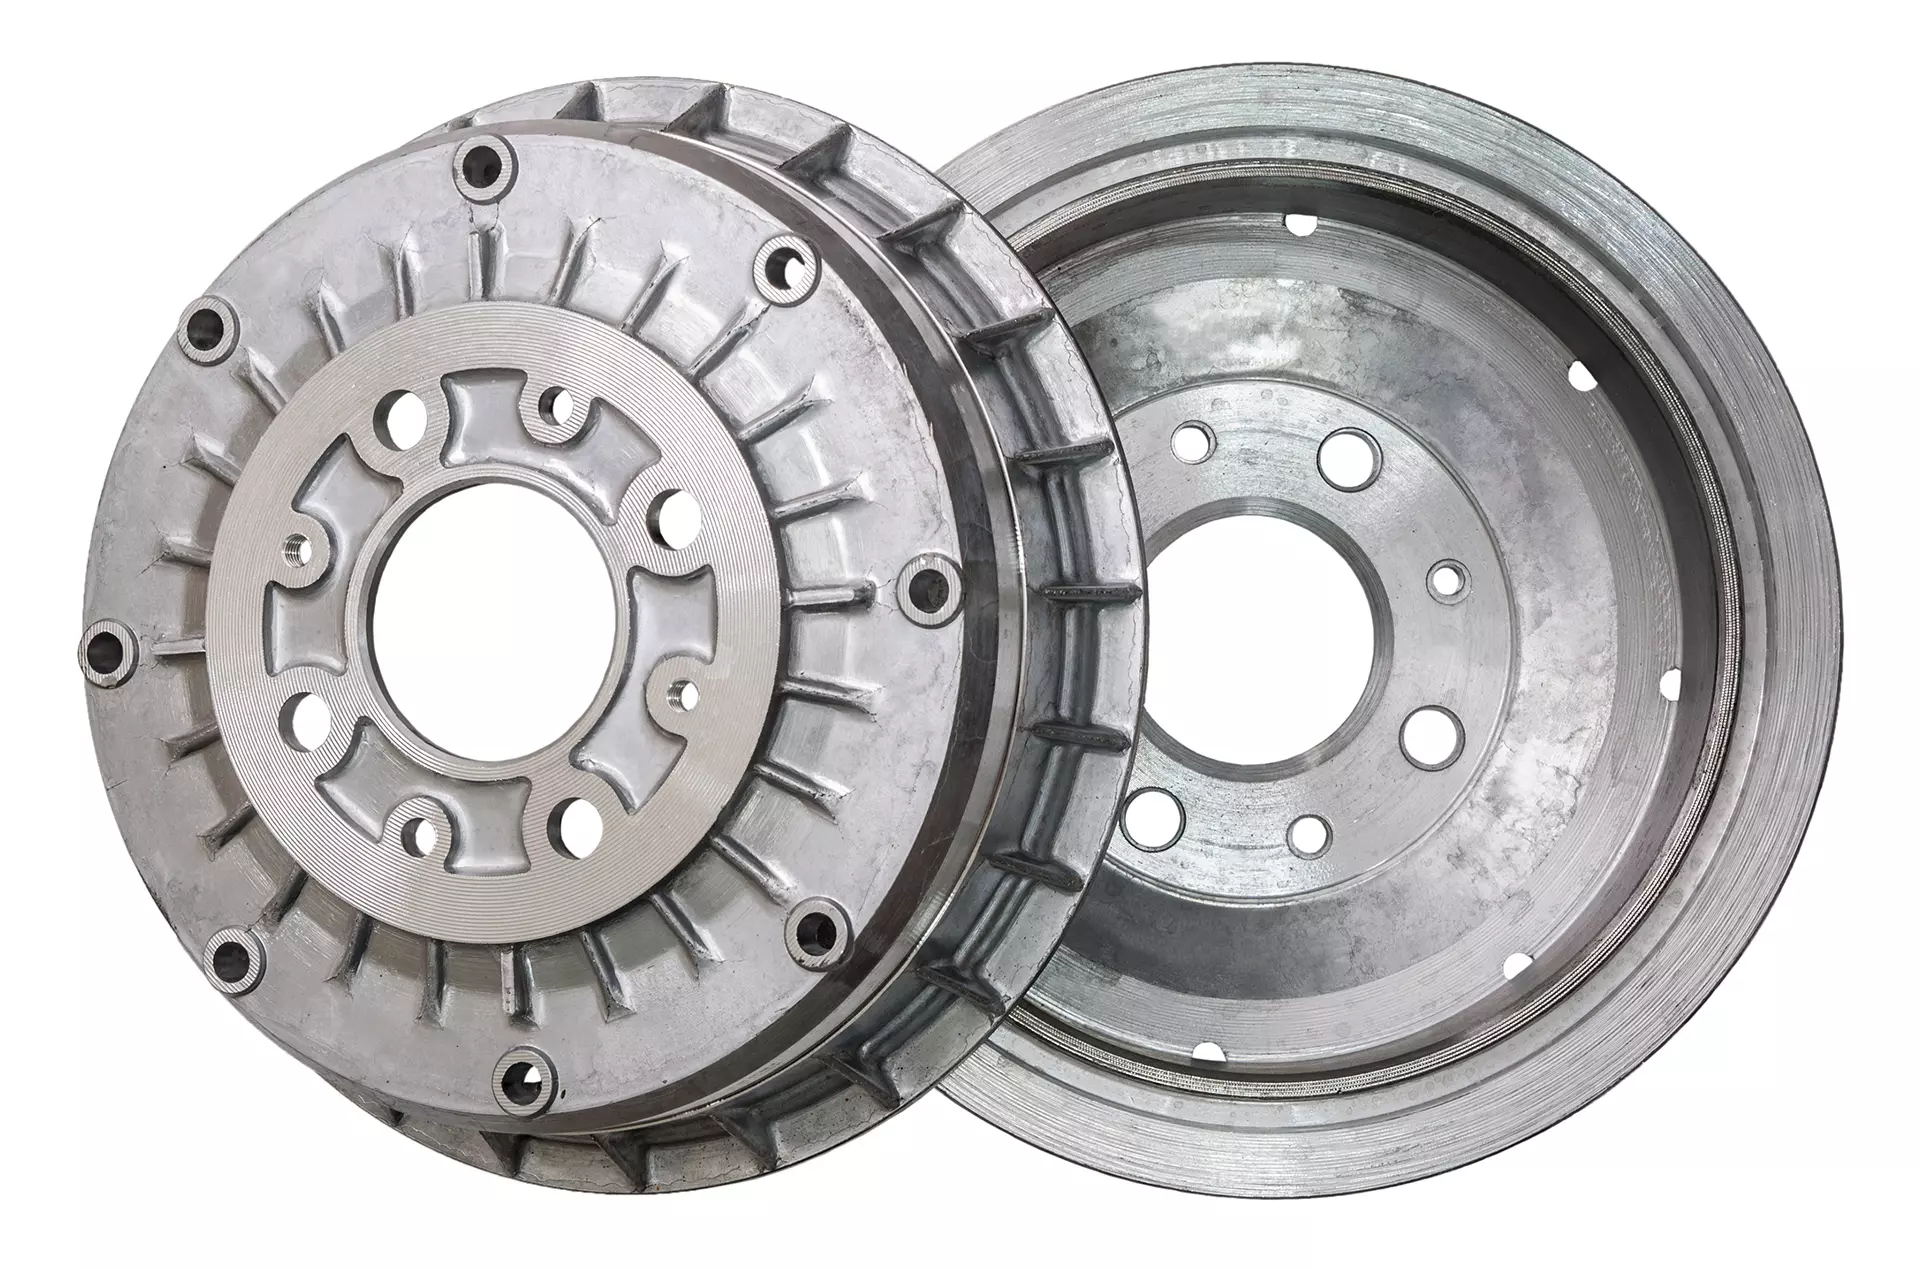 Car Drum Brakes: Definition, Components & How It Works